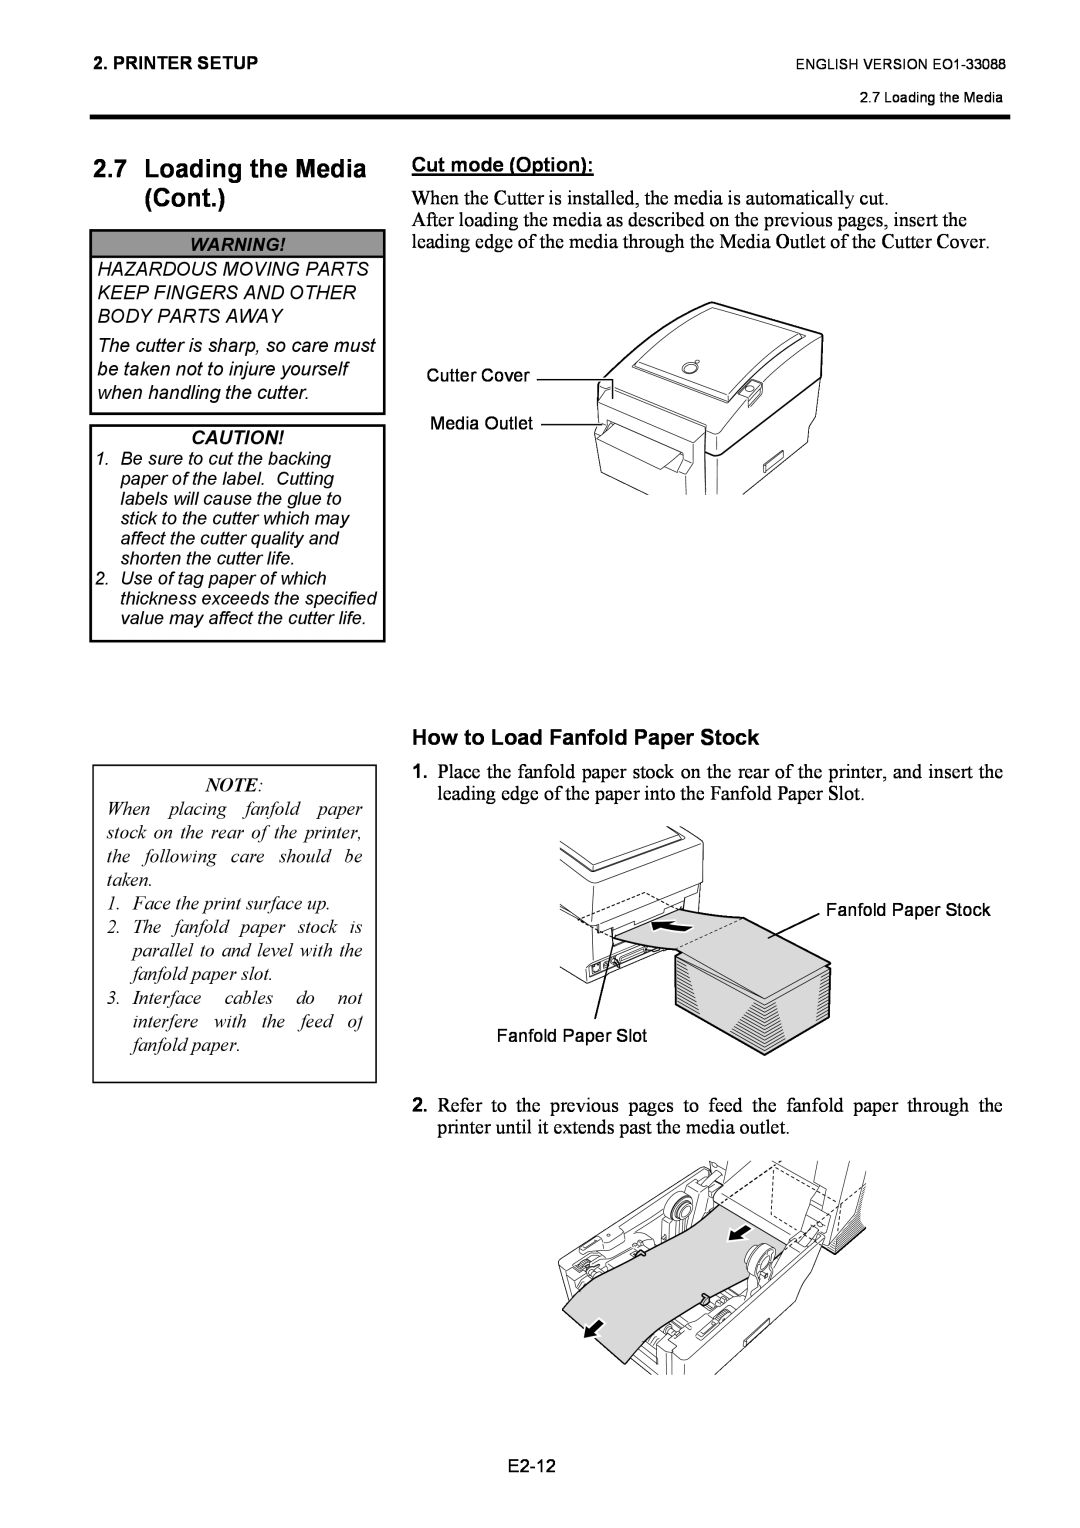 Toshiba B-EV4D SERIES, EO1-33088 owner manual How to Load Fanfold Paper Stock, Loading the Media Cont, Cut mode Option 